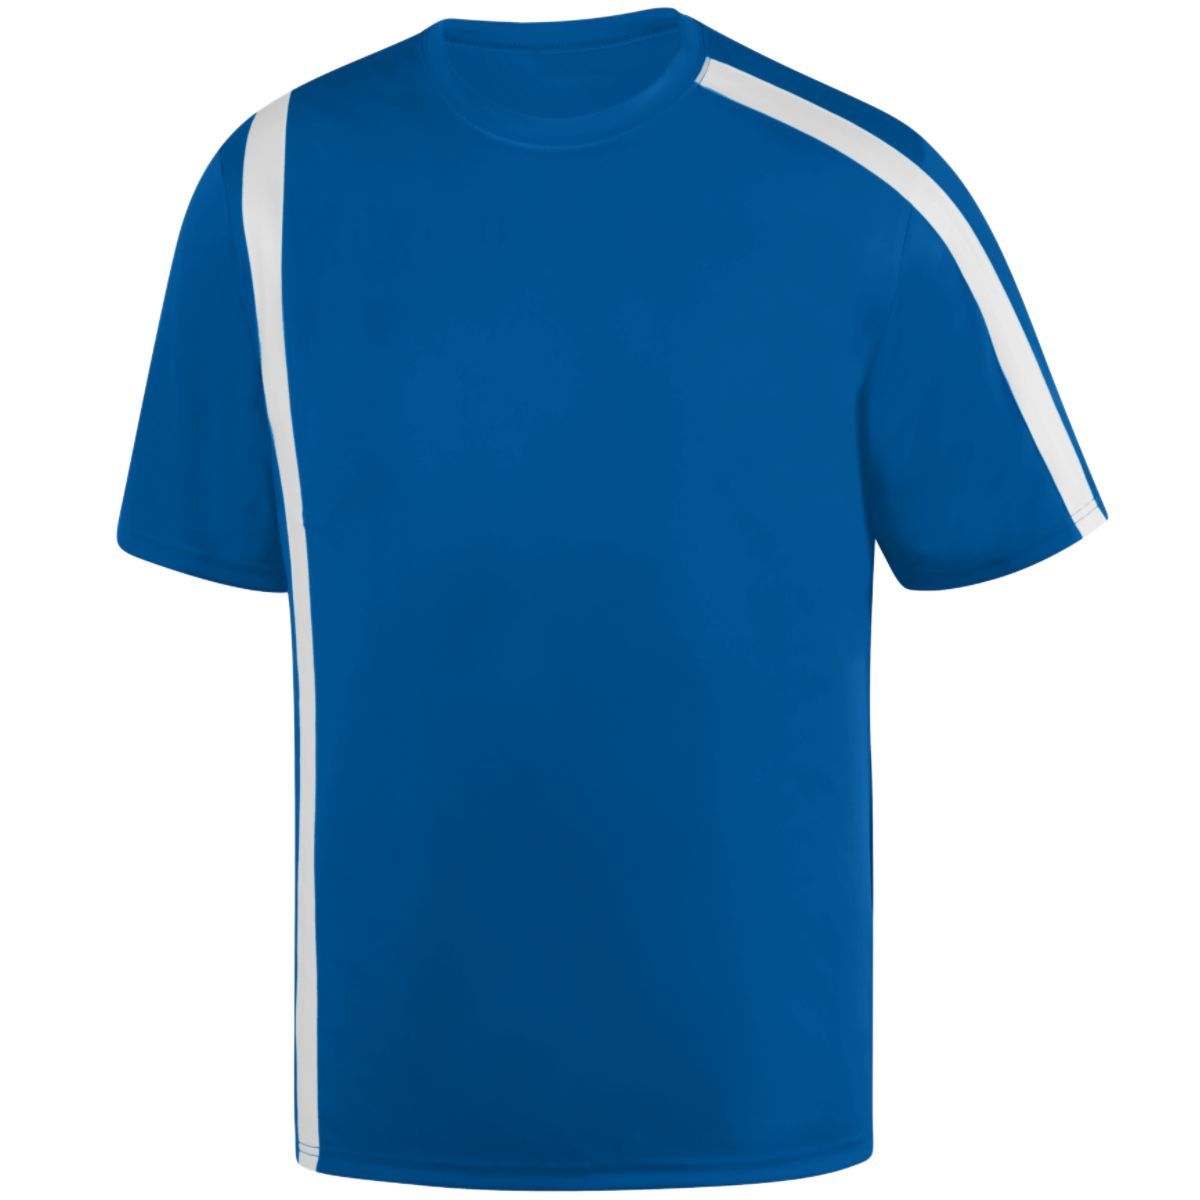 Augusta Sportswear Attacking Third Jersey in Royal/White  -Part of the Adult, Adult-Jersey, Augusta-Products, Soccer, Shirts, All-Sports-1 product lines at KanaleyCreations.com